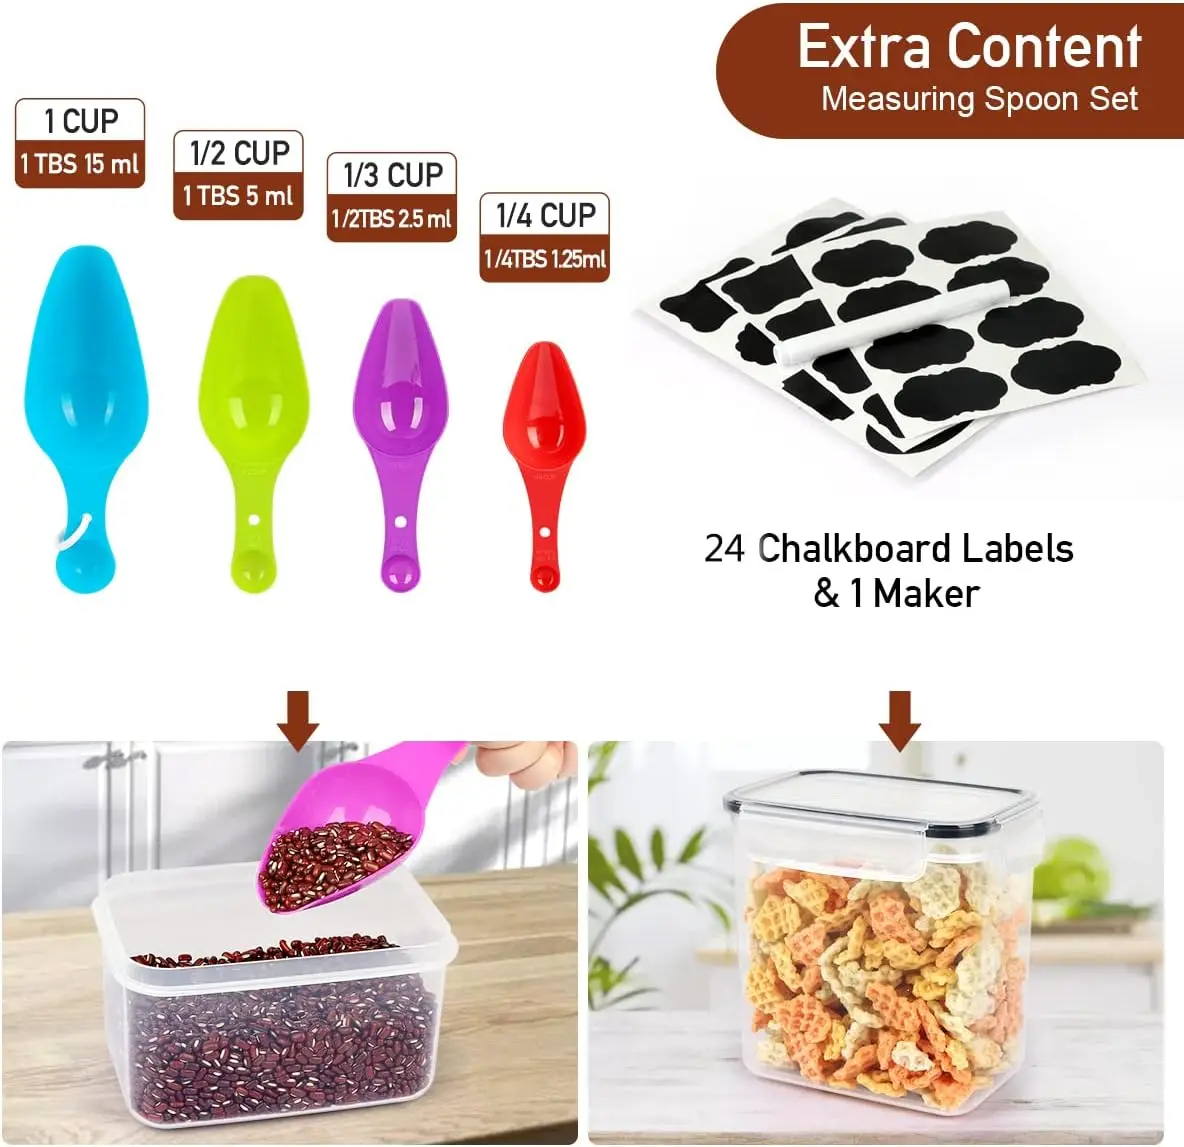 https://ae01.alicdn.com/kf/S5585deaa10ae46209d74a9eb8a2c221b2/PCS-Airtight-Food-Storage-Containers-With-Lids-BPA-Free-Cereal-Containers-Storage-for-Kitchen-Pantry-Organization.jpg